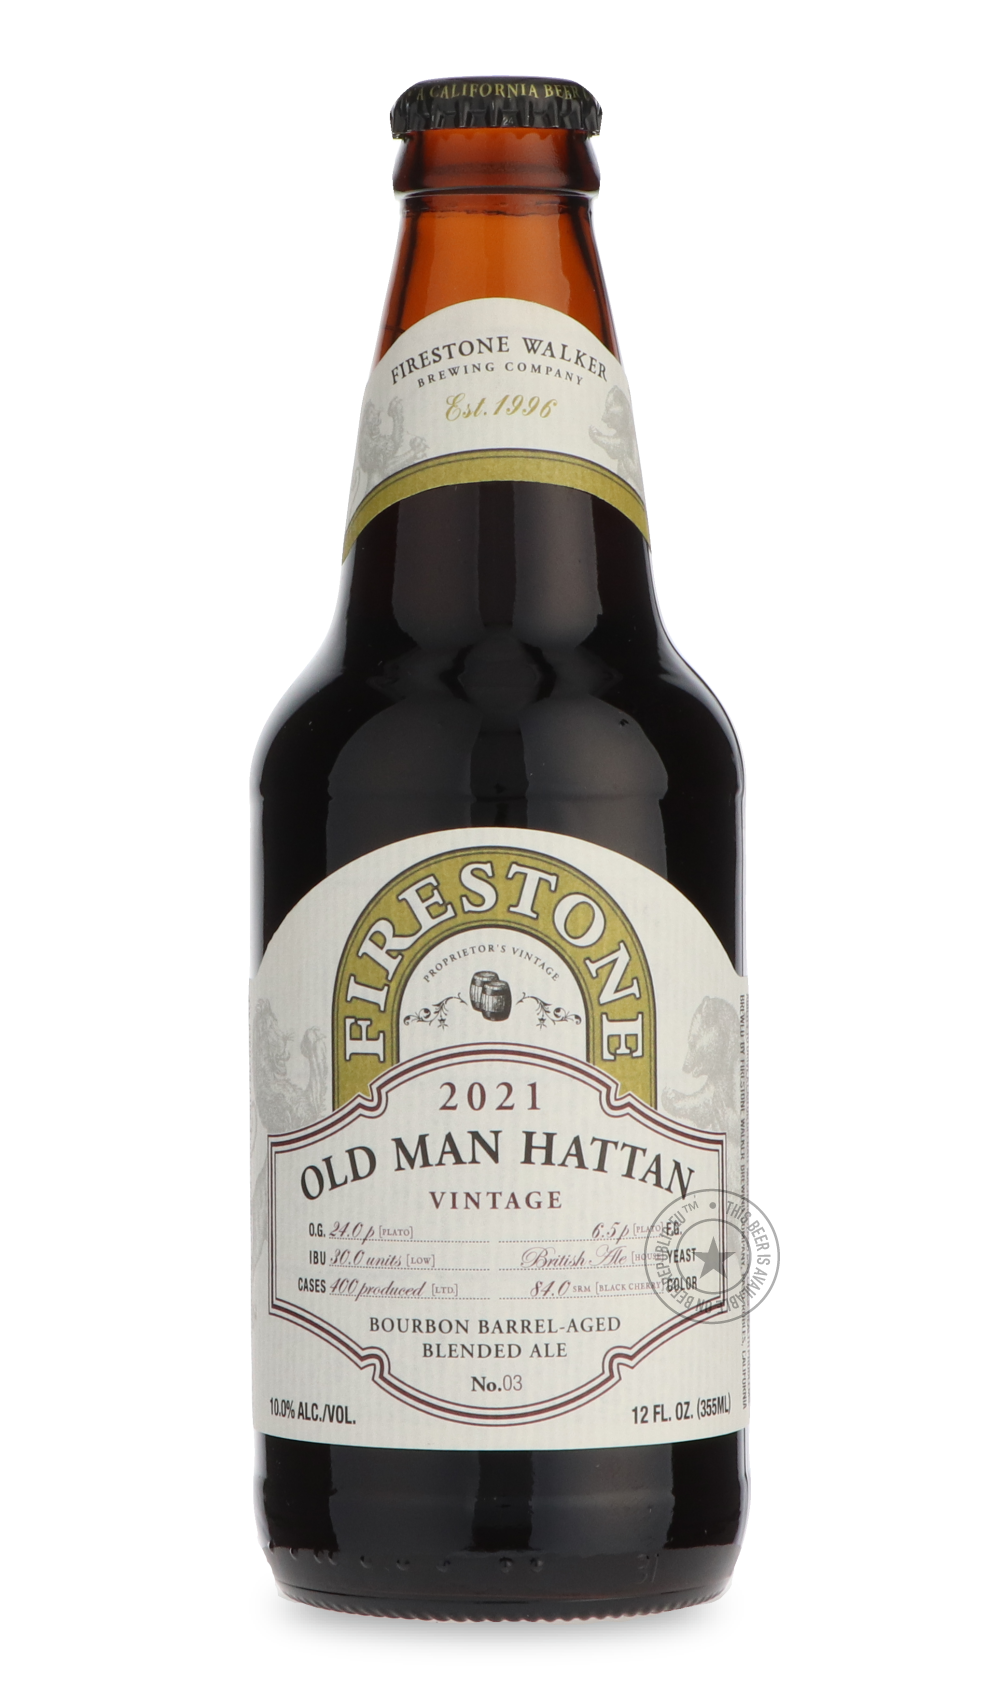 -Firestone Walker- Old Man Hattan-Brown & Dark- Only @ Beer Republic - The best online beer store for American & Canadian craft beer - Buy beer online from the USA and Canada - Bier online kopen - Amerikaans bier kopen - Craft beer store - Craft beer kopen - Amerikanisch bier kaufen - Bier online kaufen - Acheter biere online - IPA - Stout - Porter - New England IPA - Hazy IPA - Imperial Stout - Barrel Aged - Barrel Aged Imperial Stout - Brown - Dark beer - Blond - Blonde - Pilsner - Lager - Wheat - Weizen 